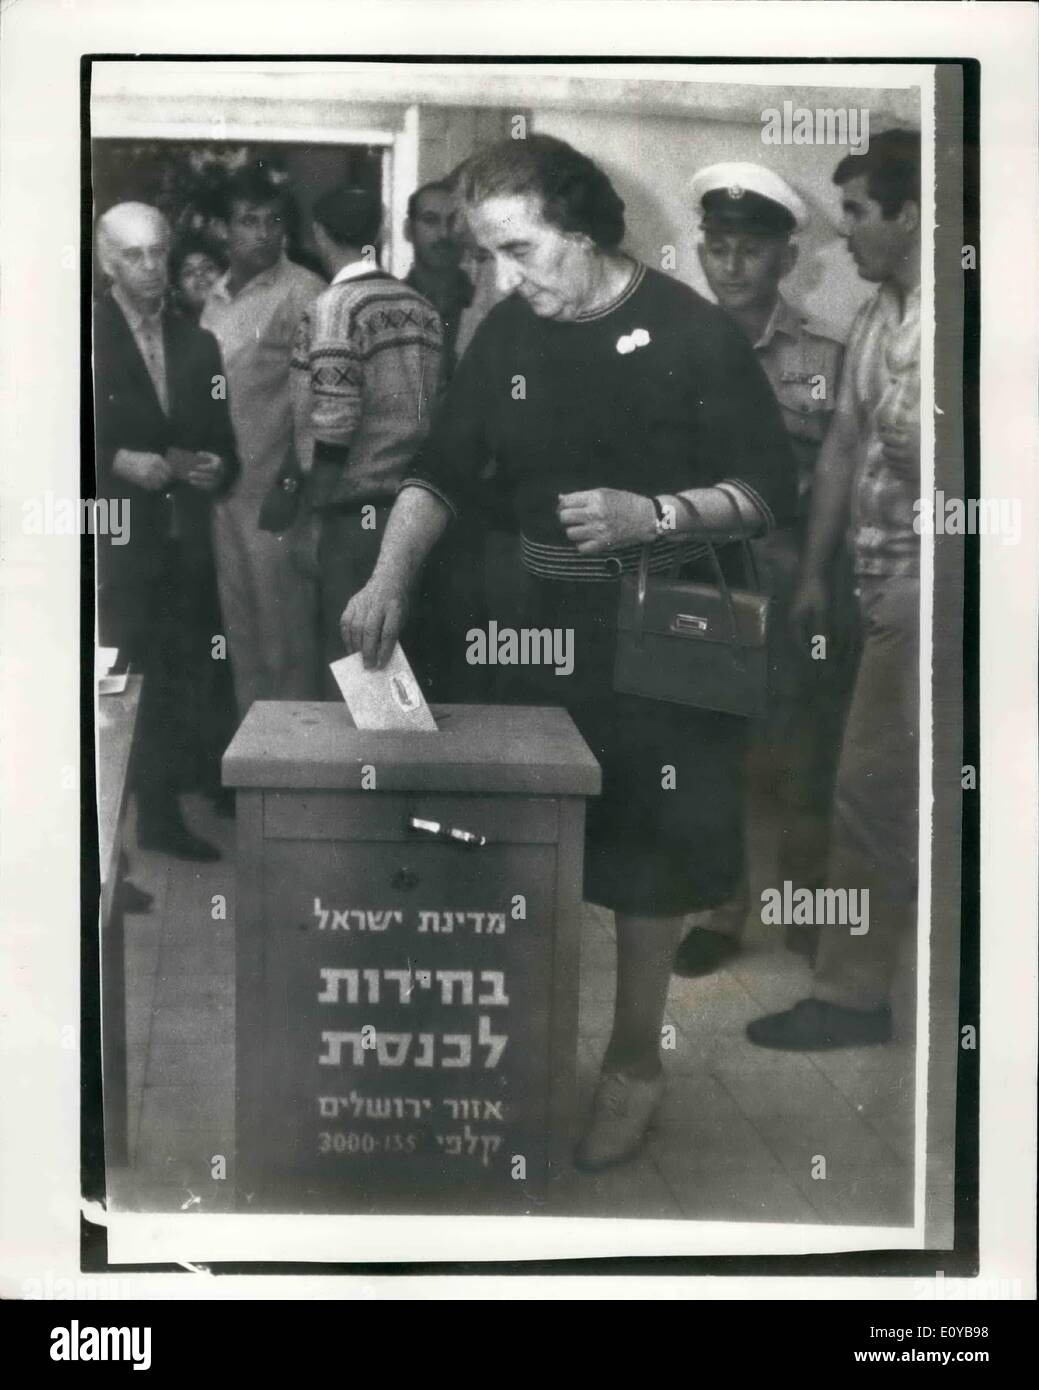 Oct. 10, 1969 - Prime minister Golda Meir Casts Her Vote In The Israeli Elections: Photo shows. Israel Prime Minister, Golda Meir, is seen casting her vote at the poll in the Rubin Academy of Music in Jerusalem during today's election for the seventh Kuesset, or Parliament Stock Photo